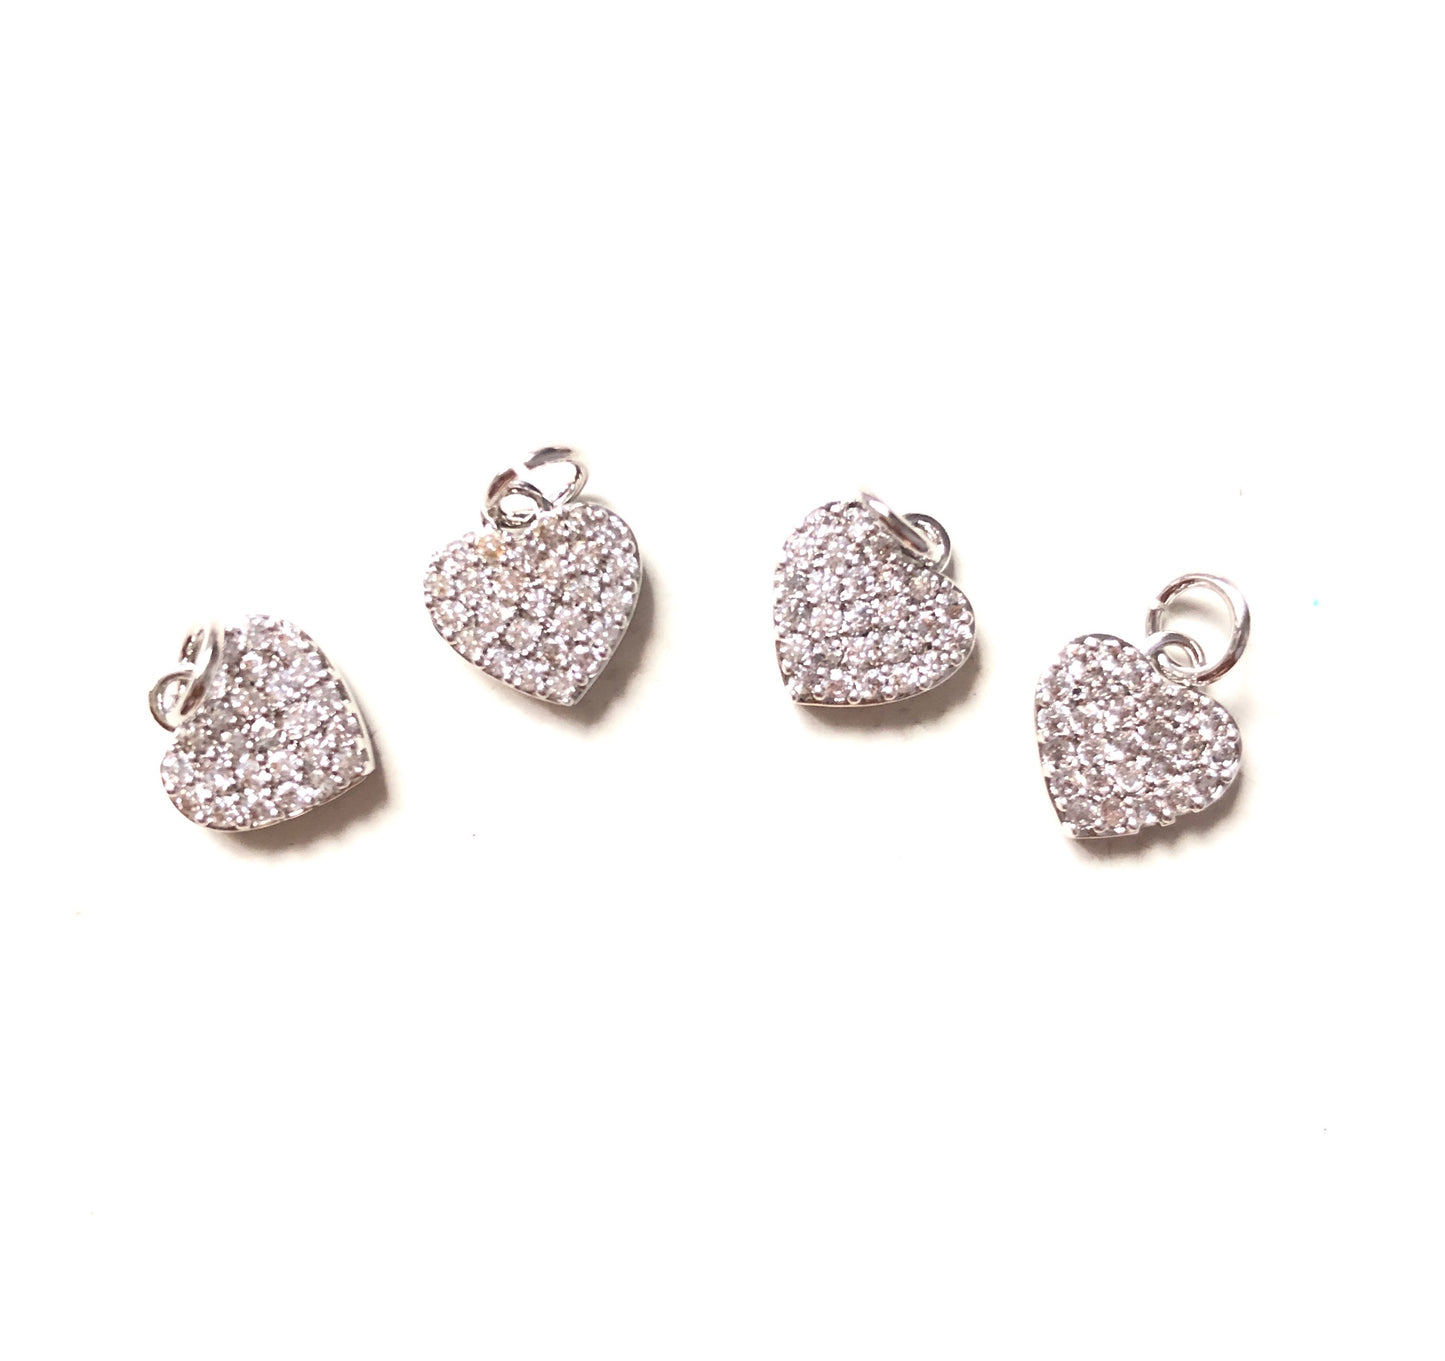 10pcs/lot 10*9.5mm CZ Paved Small Heart Charms Silver CZ Paved Charms Hearts Small Sizes Charms Beads Beyond